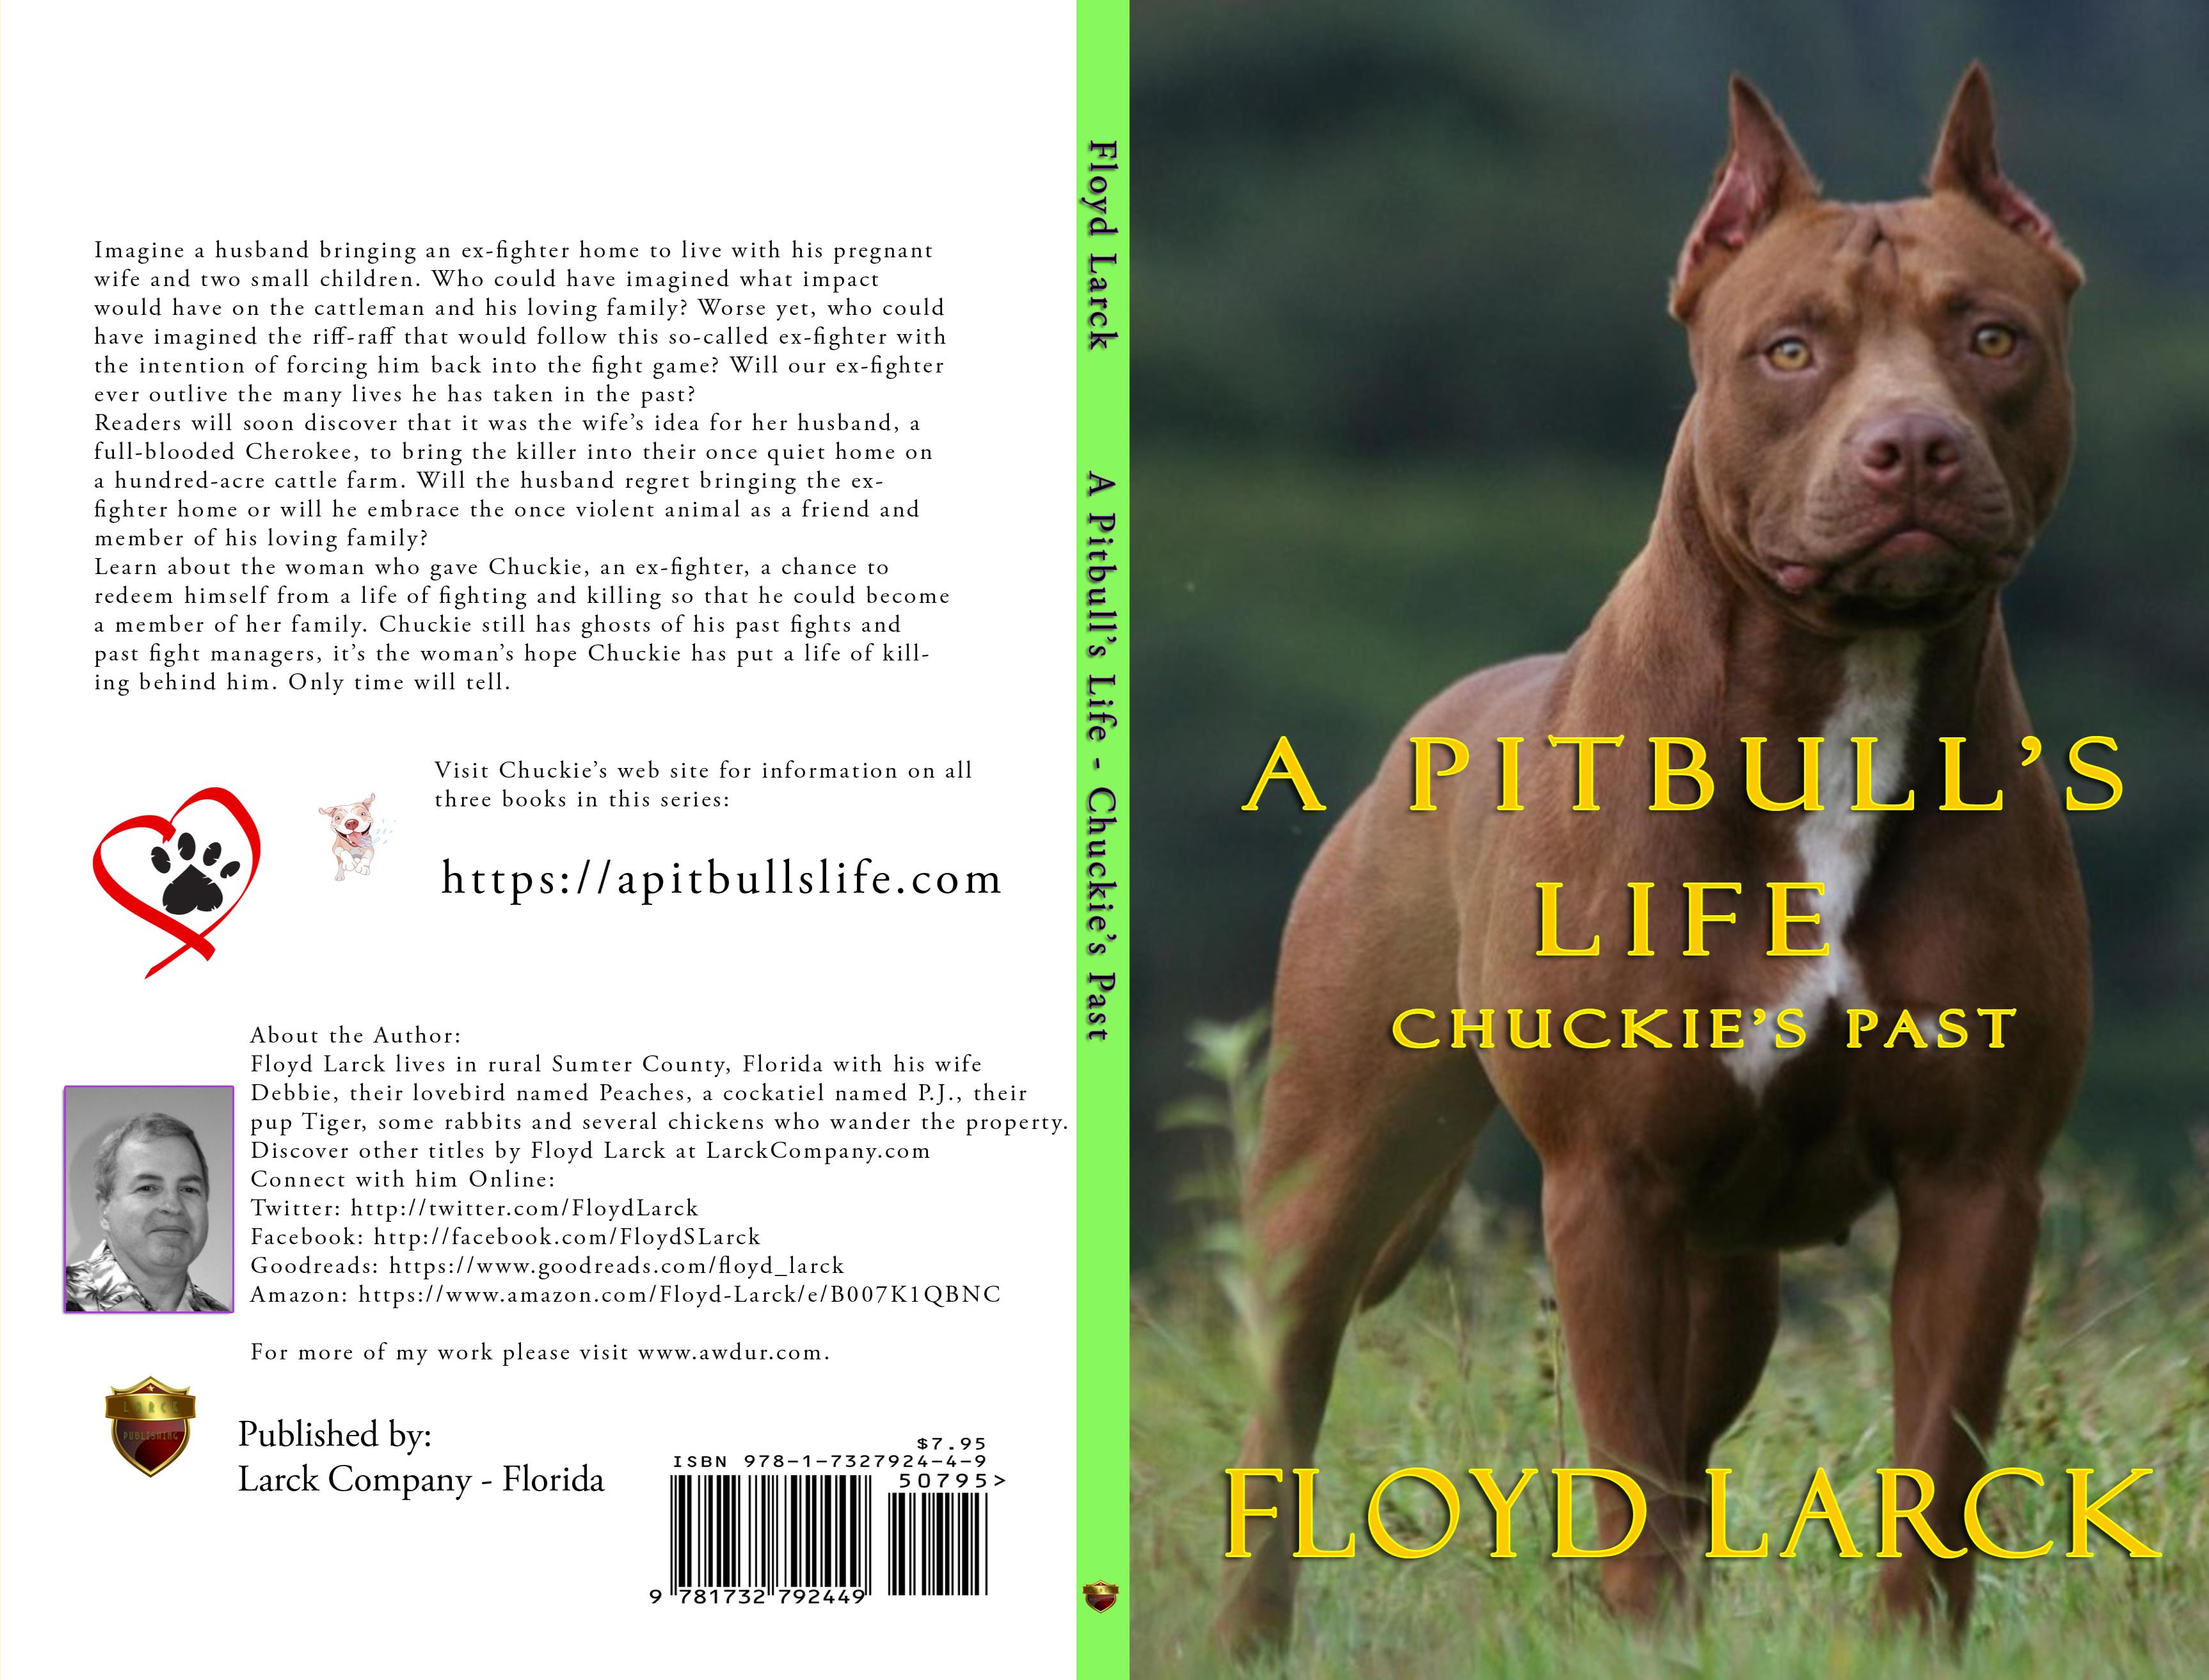 A Pit Bull’s Life - Chuckie’s Past cover image